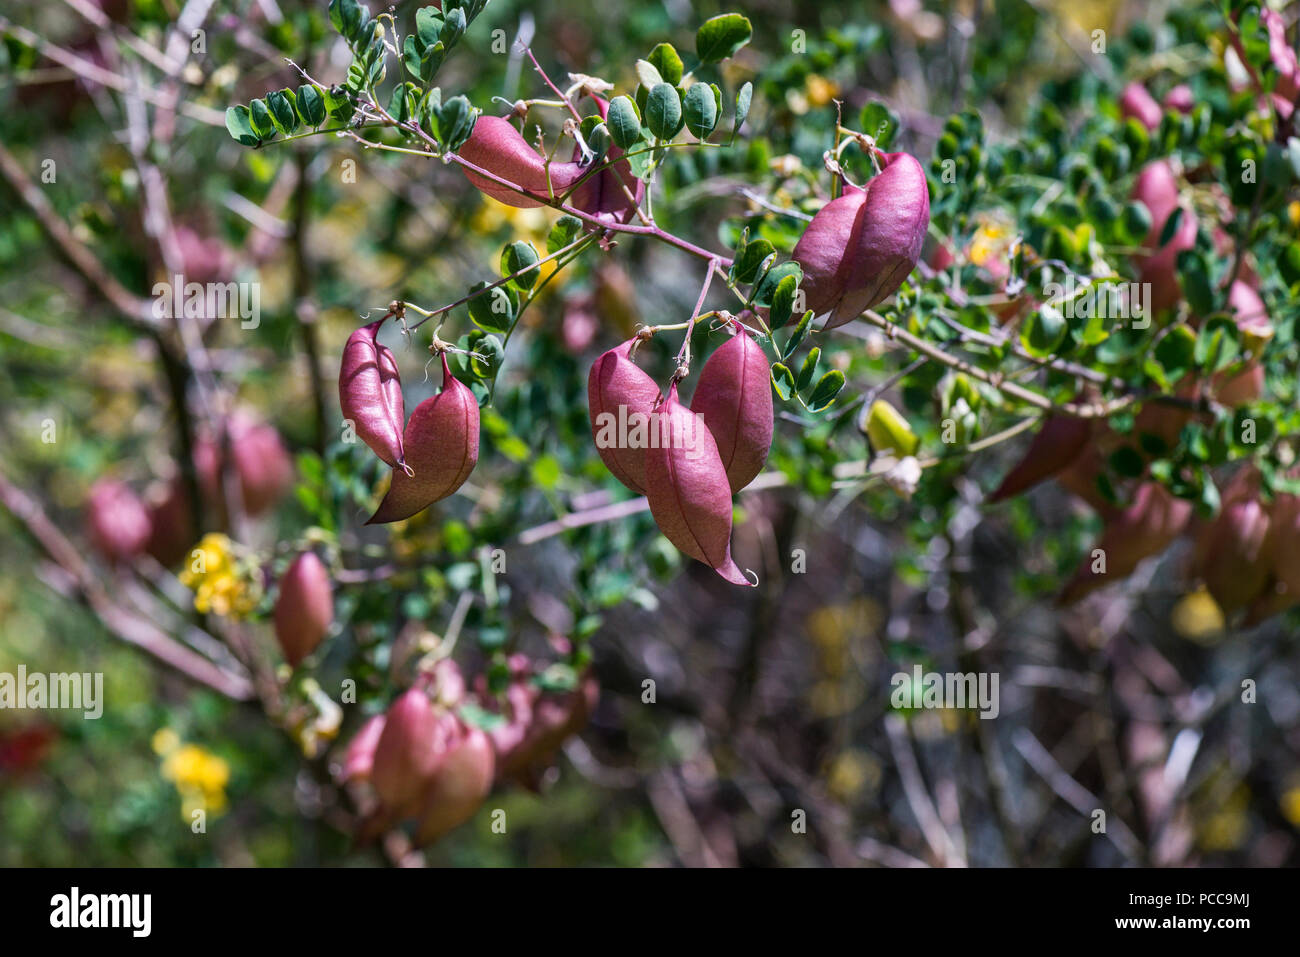 The translucent, inflated fruits of a common bladder senna (Colutea arborescens) Stock Photo